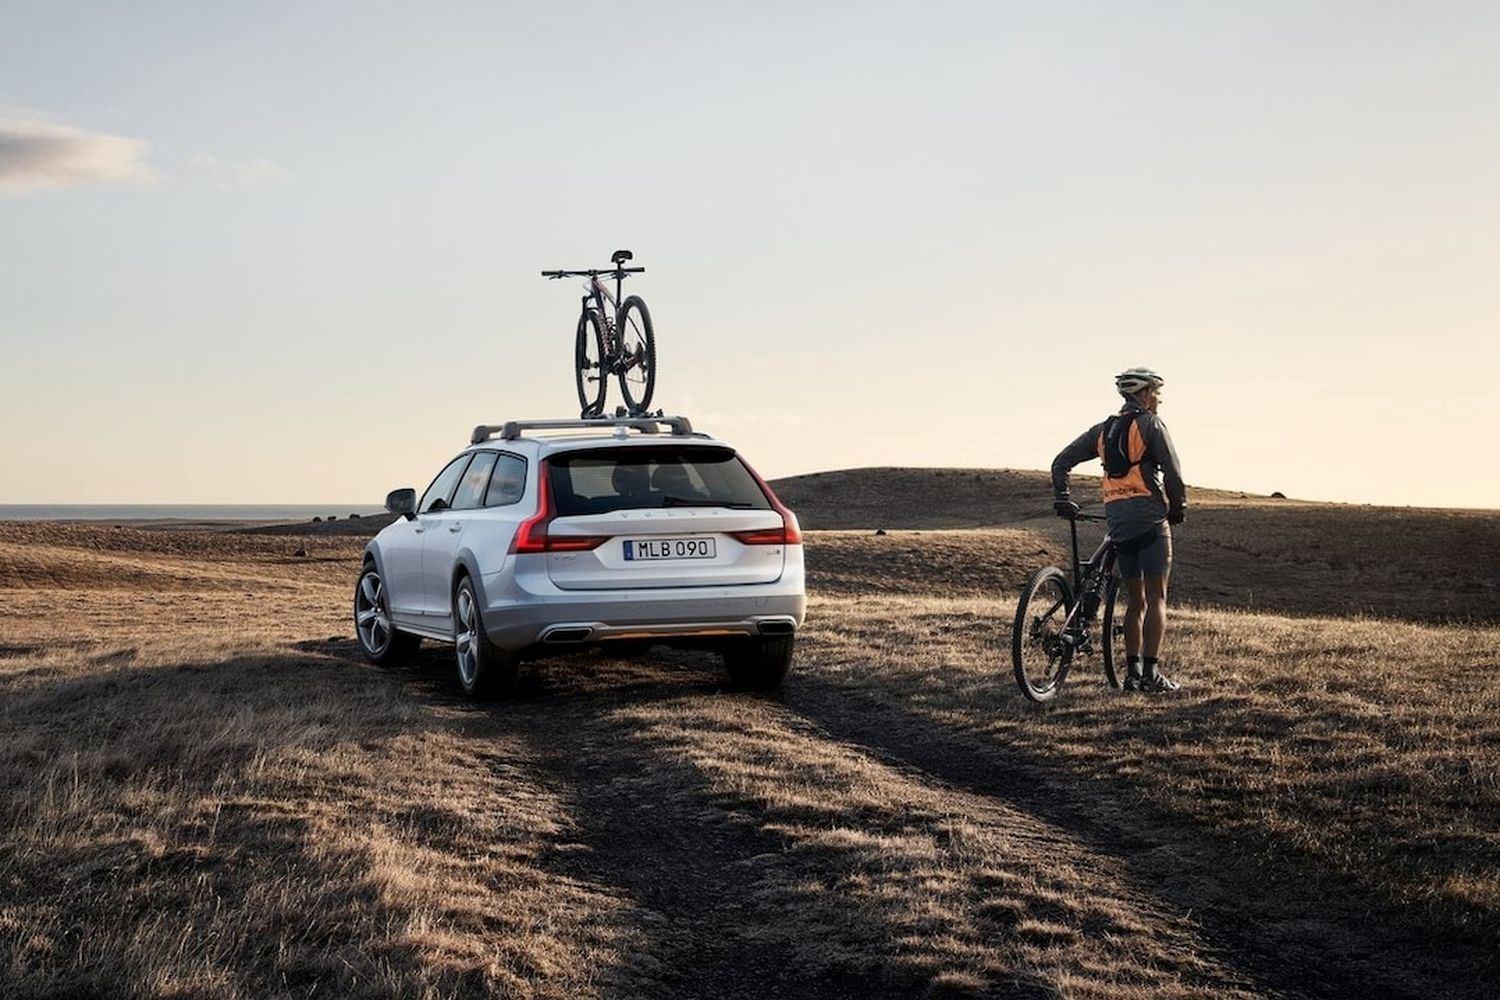 Volvo XC90 Recharge parked in field with roof cycle pack installed with bicycle loaded. To the right of the vehicle, is the passenger with bicycle.